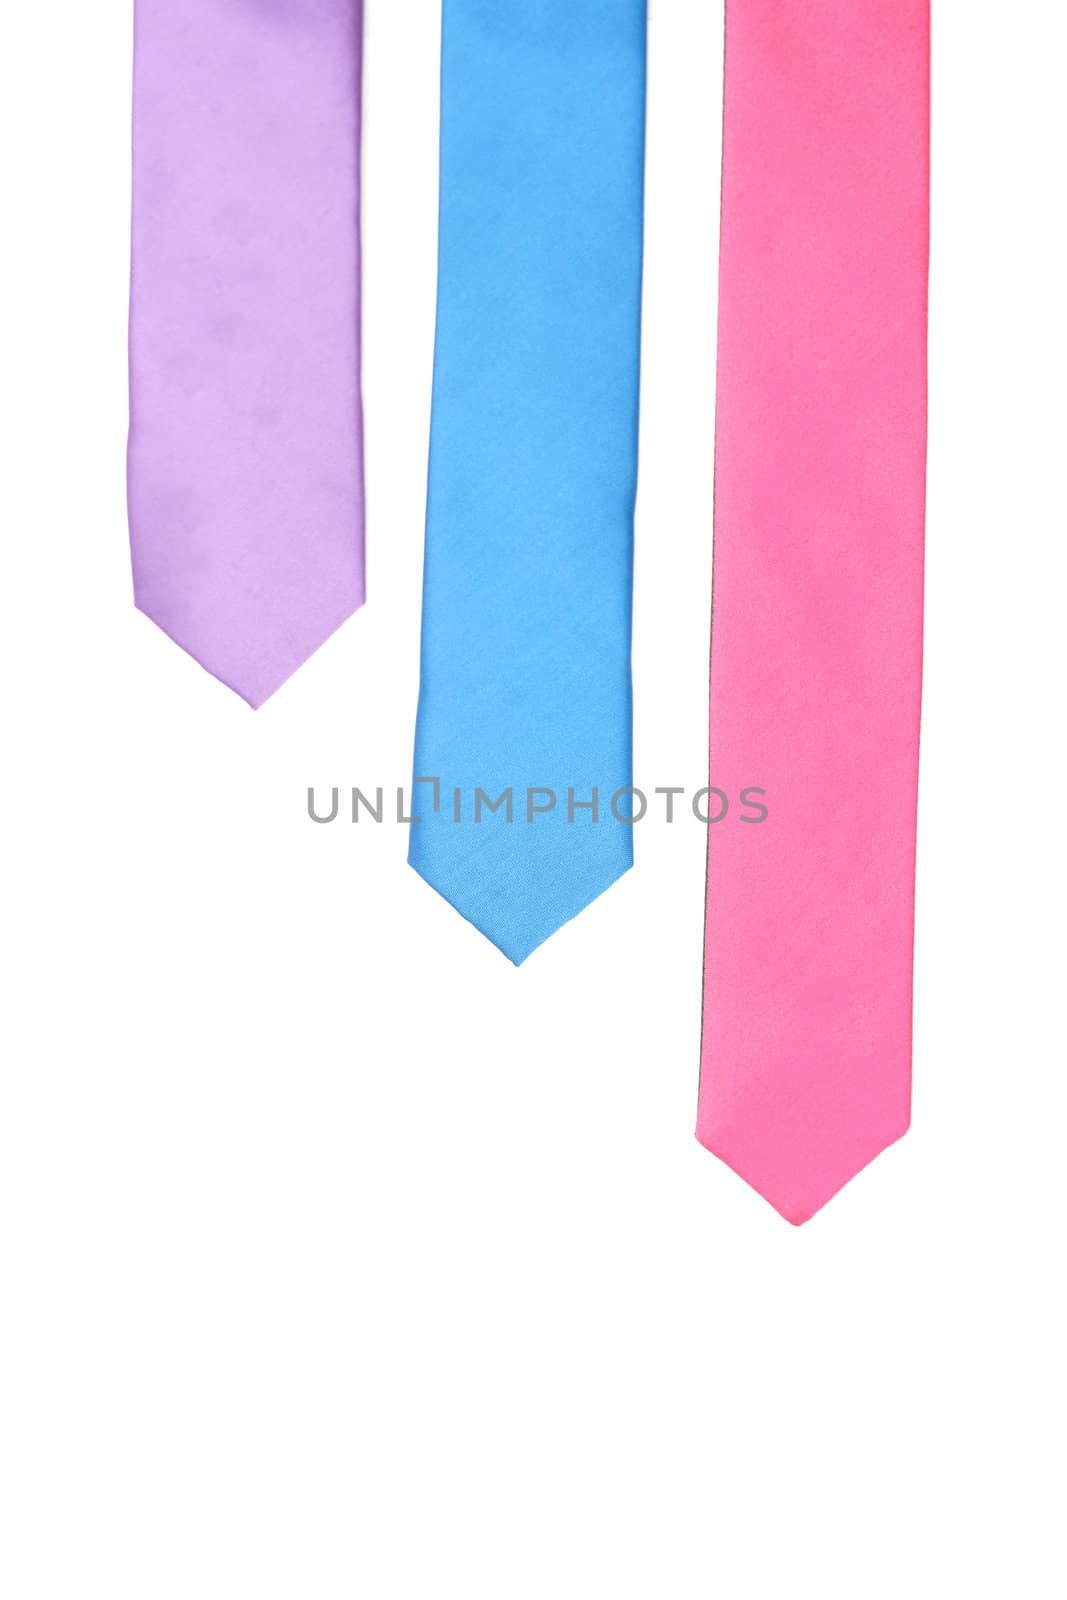 Ties isolated on a white background